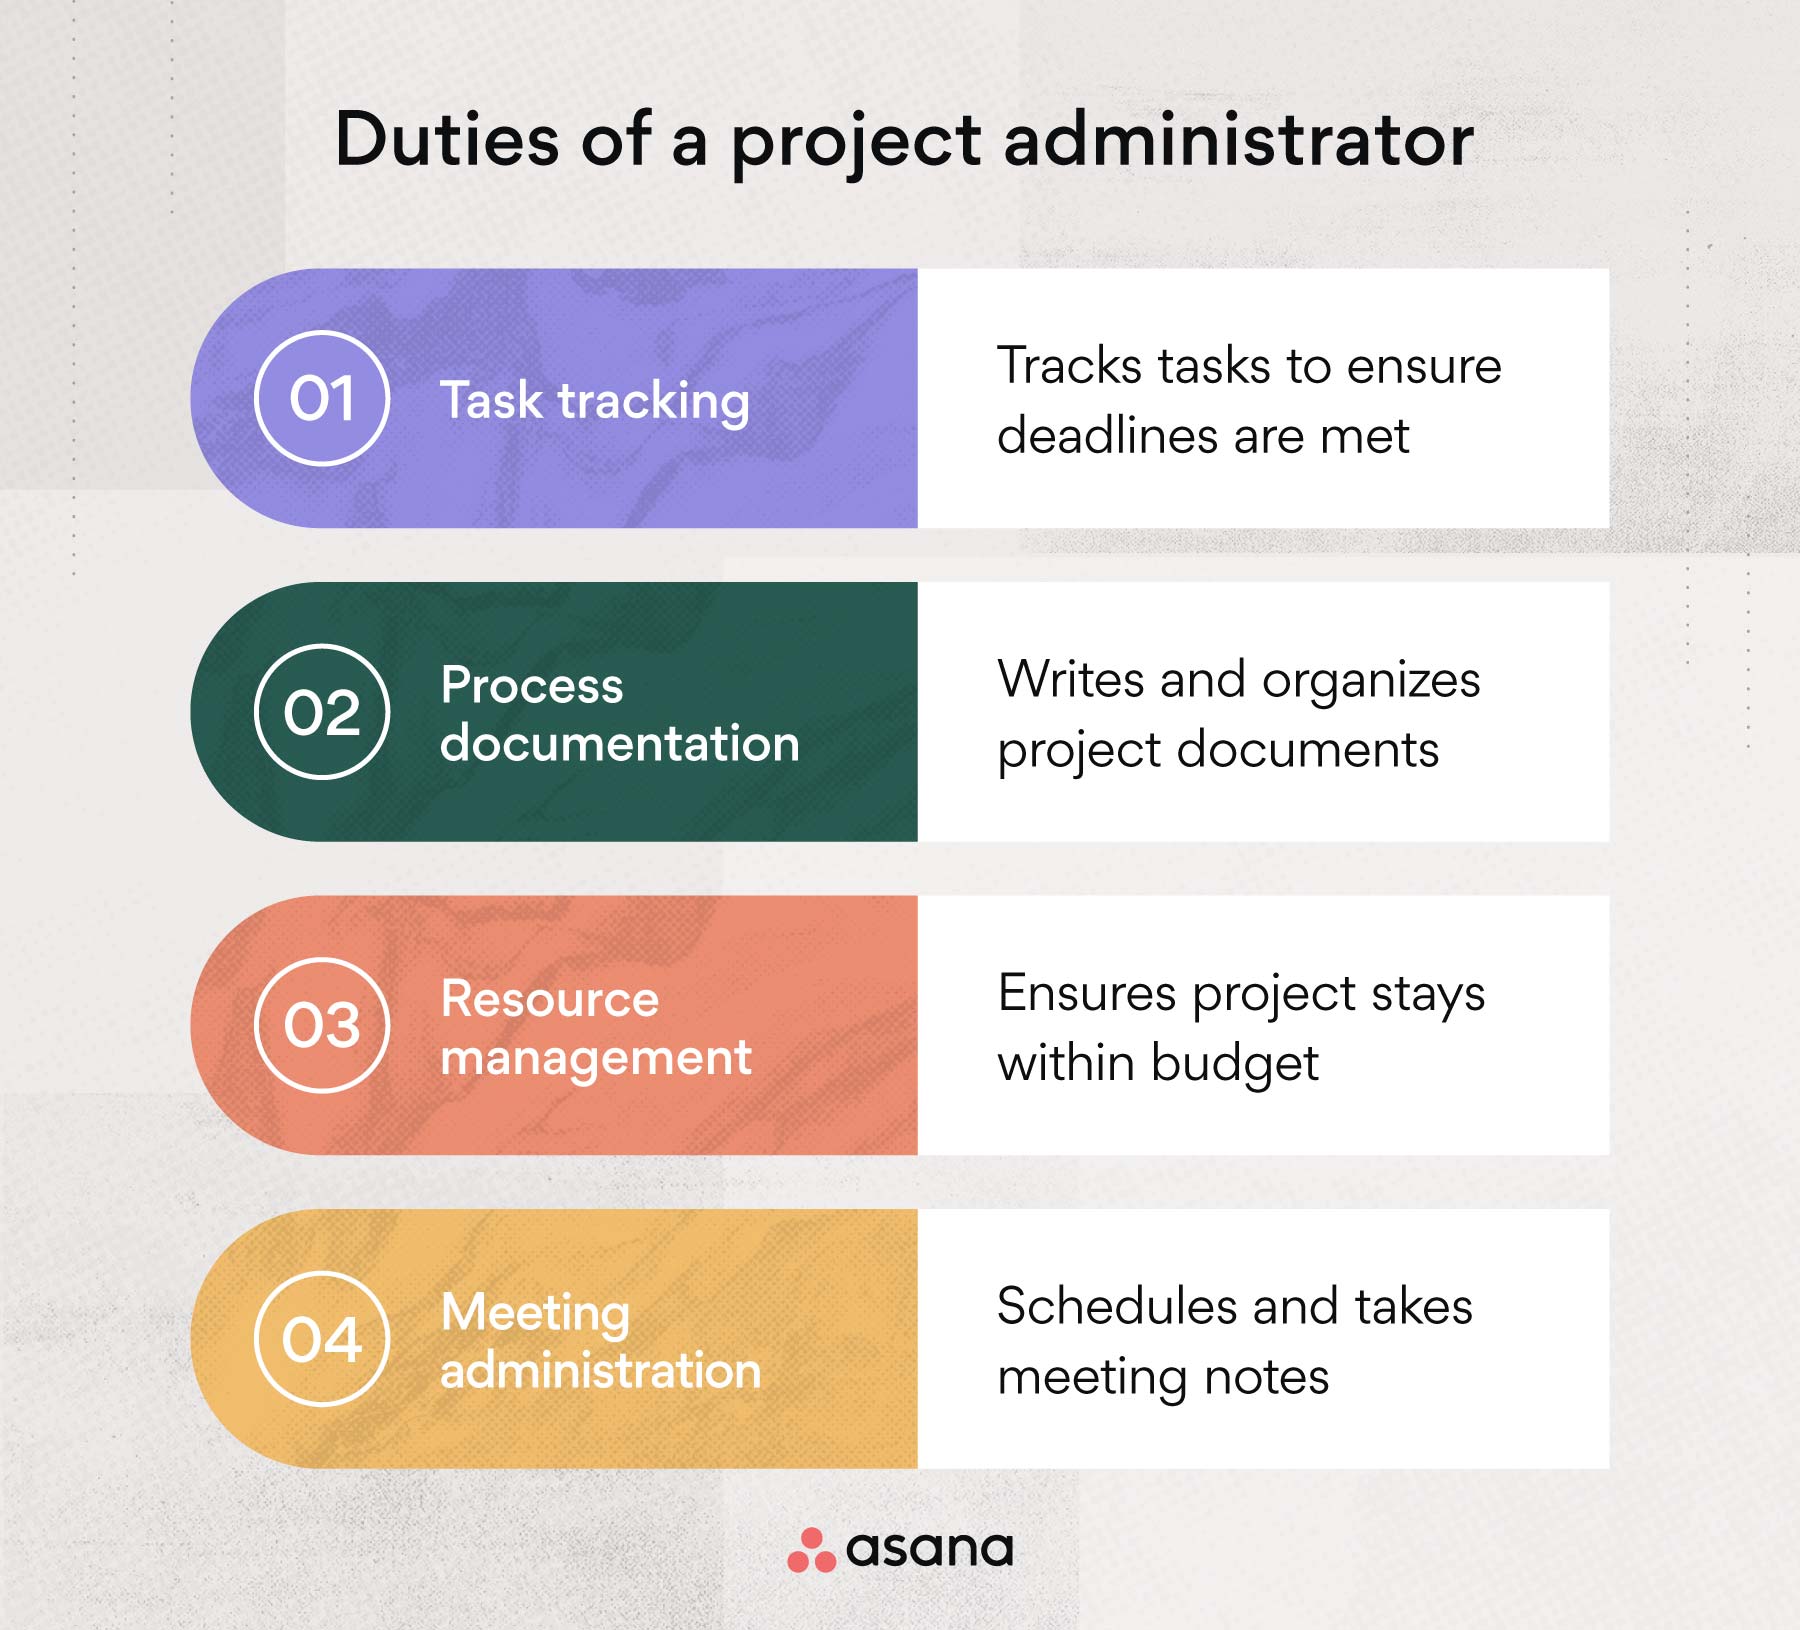 Duties of a project administrator